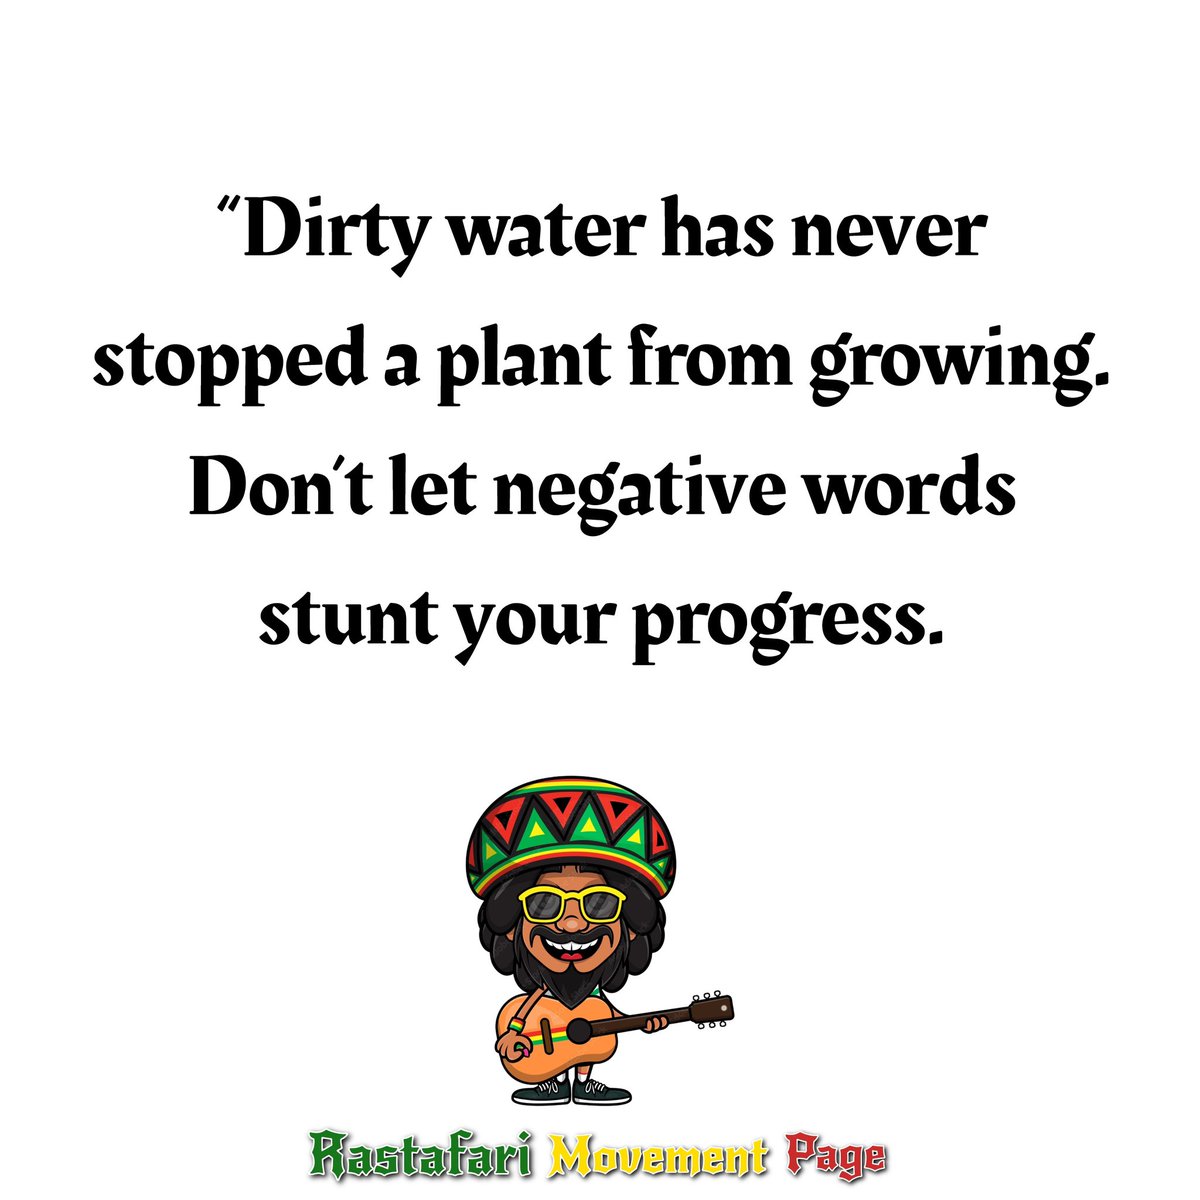 Dirty water has never stopped a plant from growing. Don’t let negative words stunt your progress.